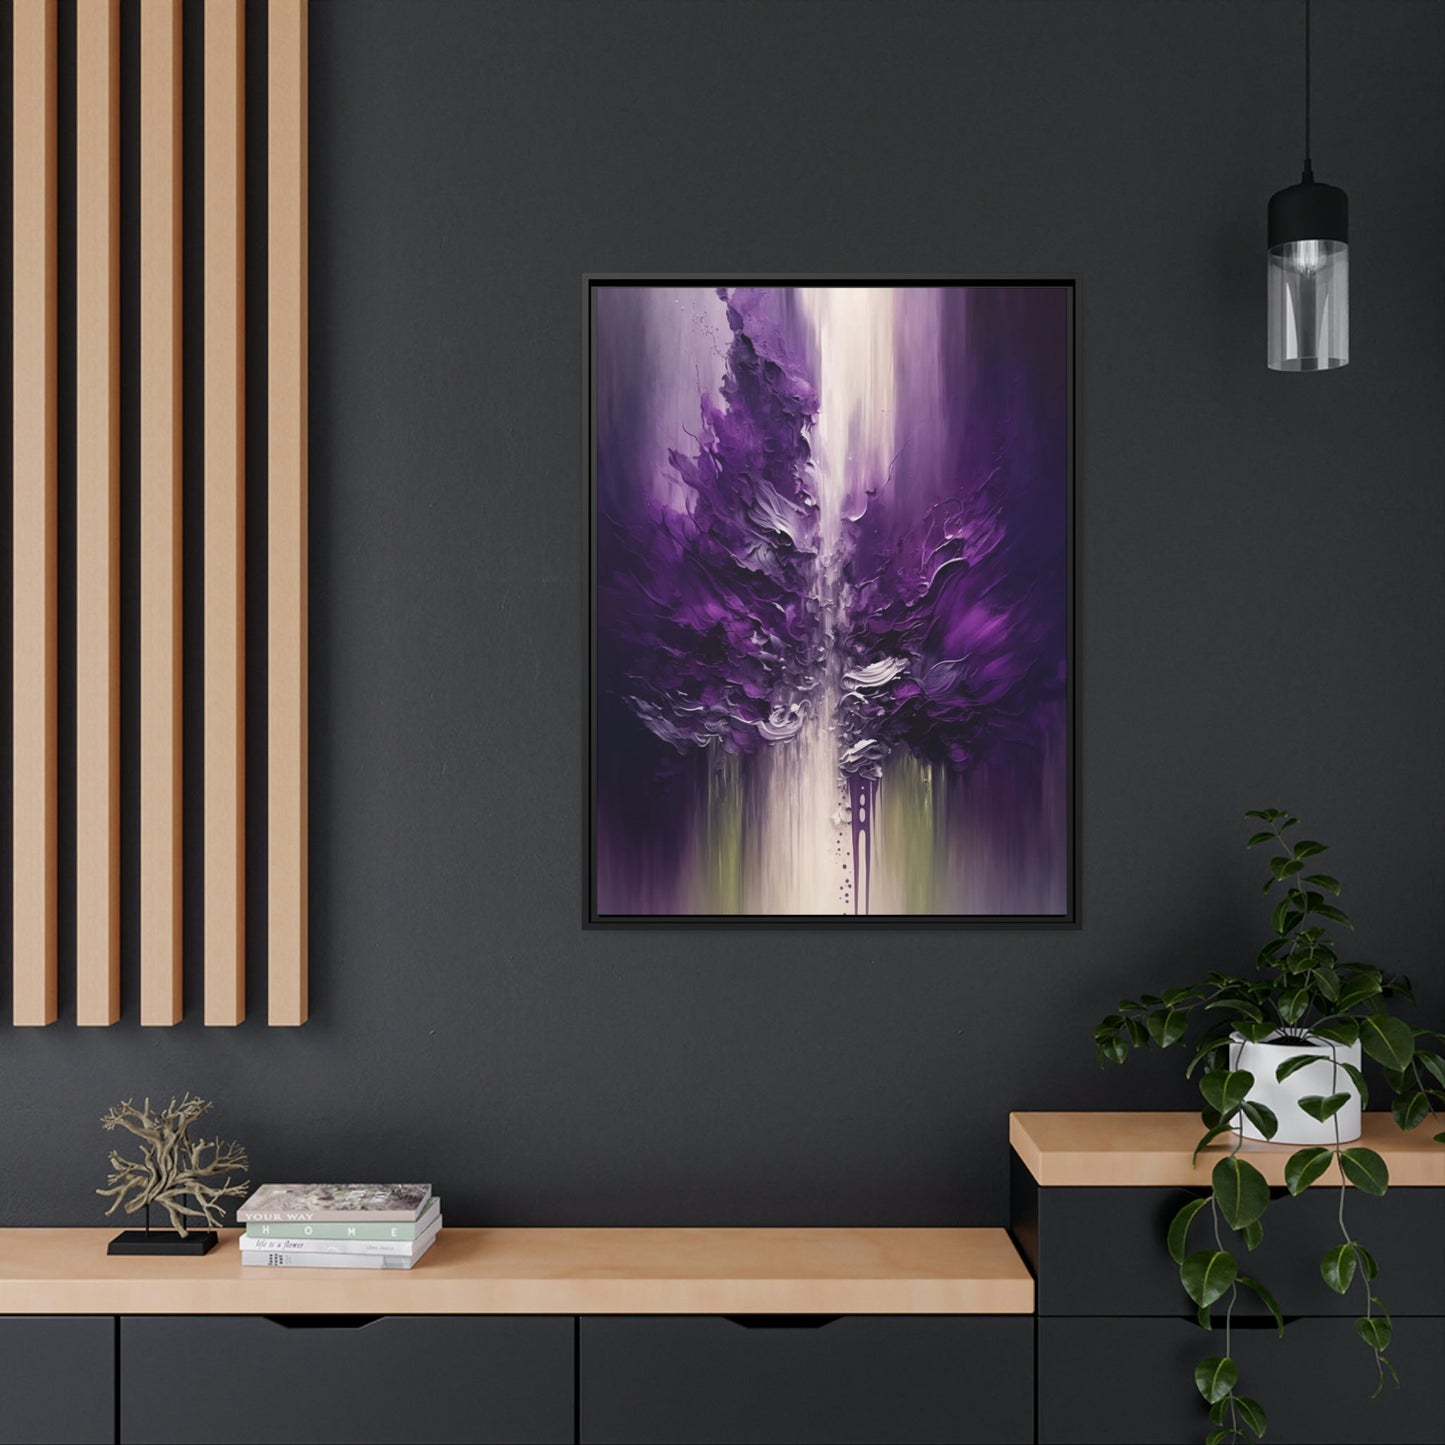 Purple Passion: Framed Poster of Abstract Art with Intense Hues on Canvas